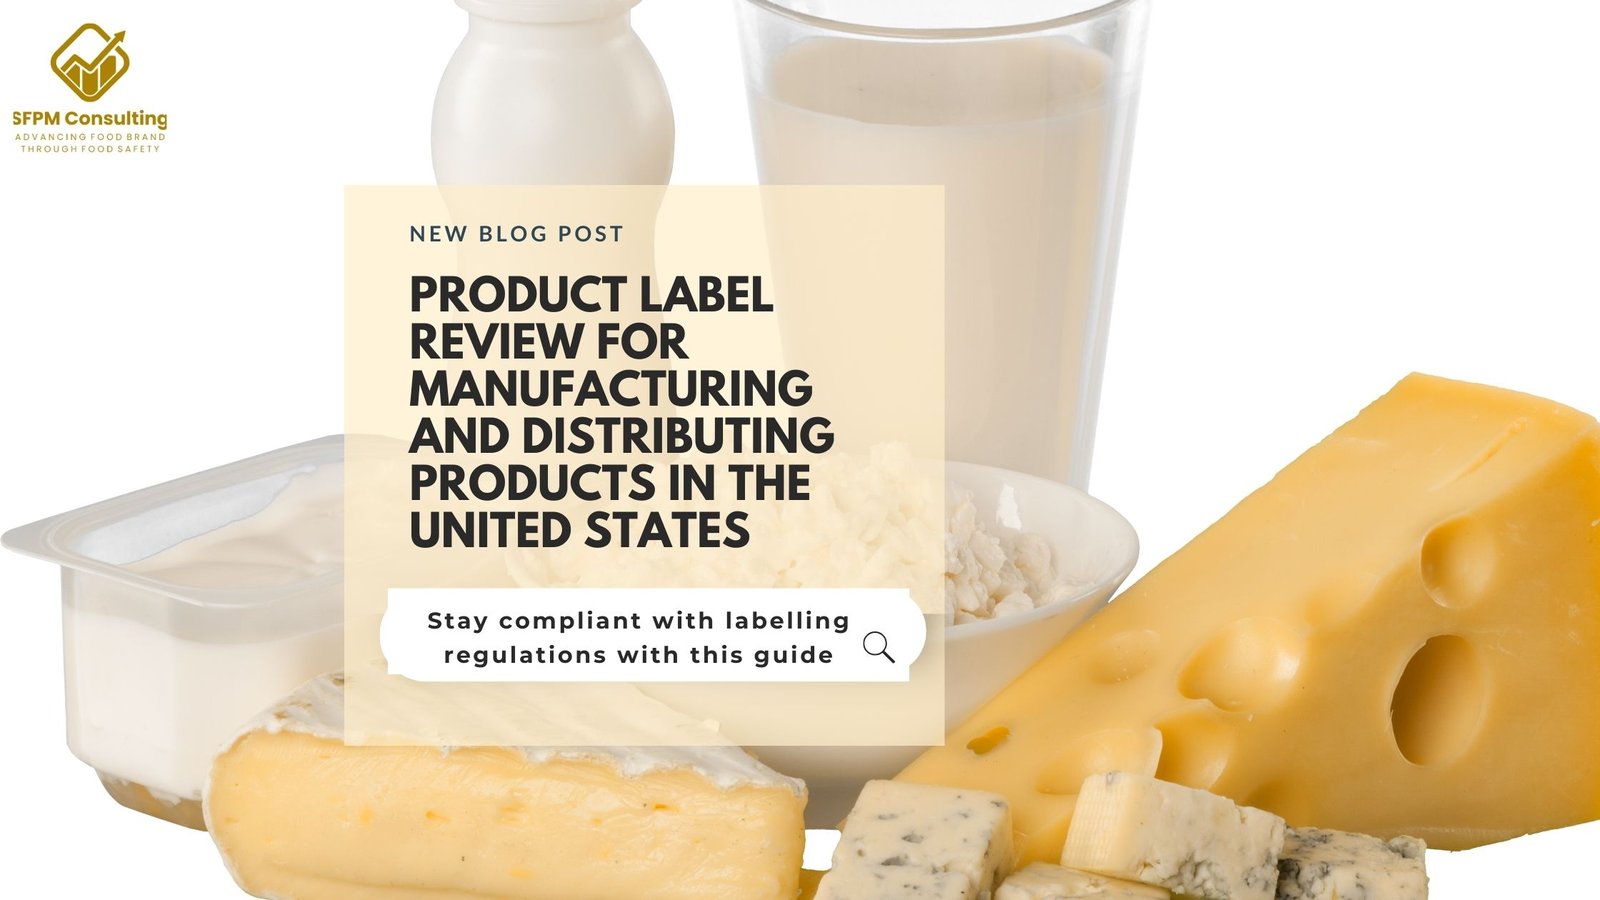 SFPM Consulting present Product Label Review for Manufacturing and Distributing Products in the United States